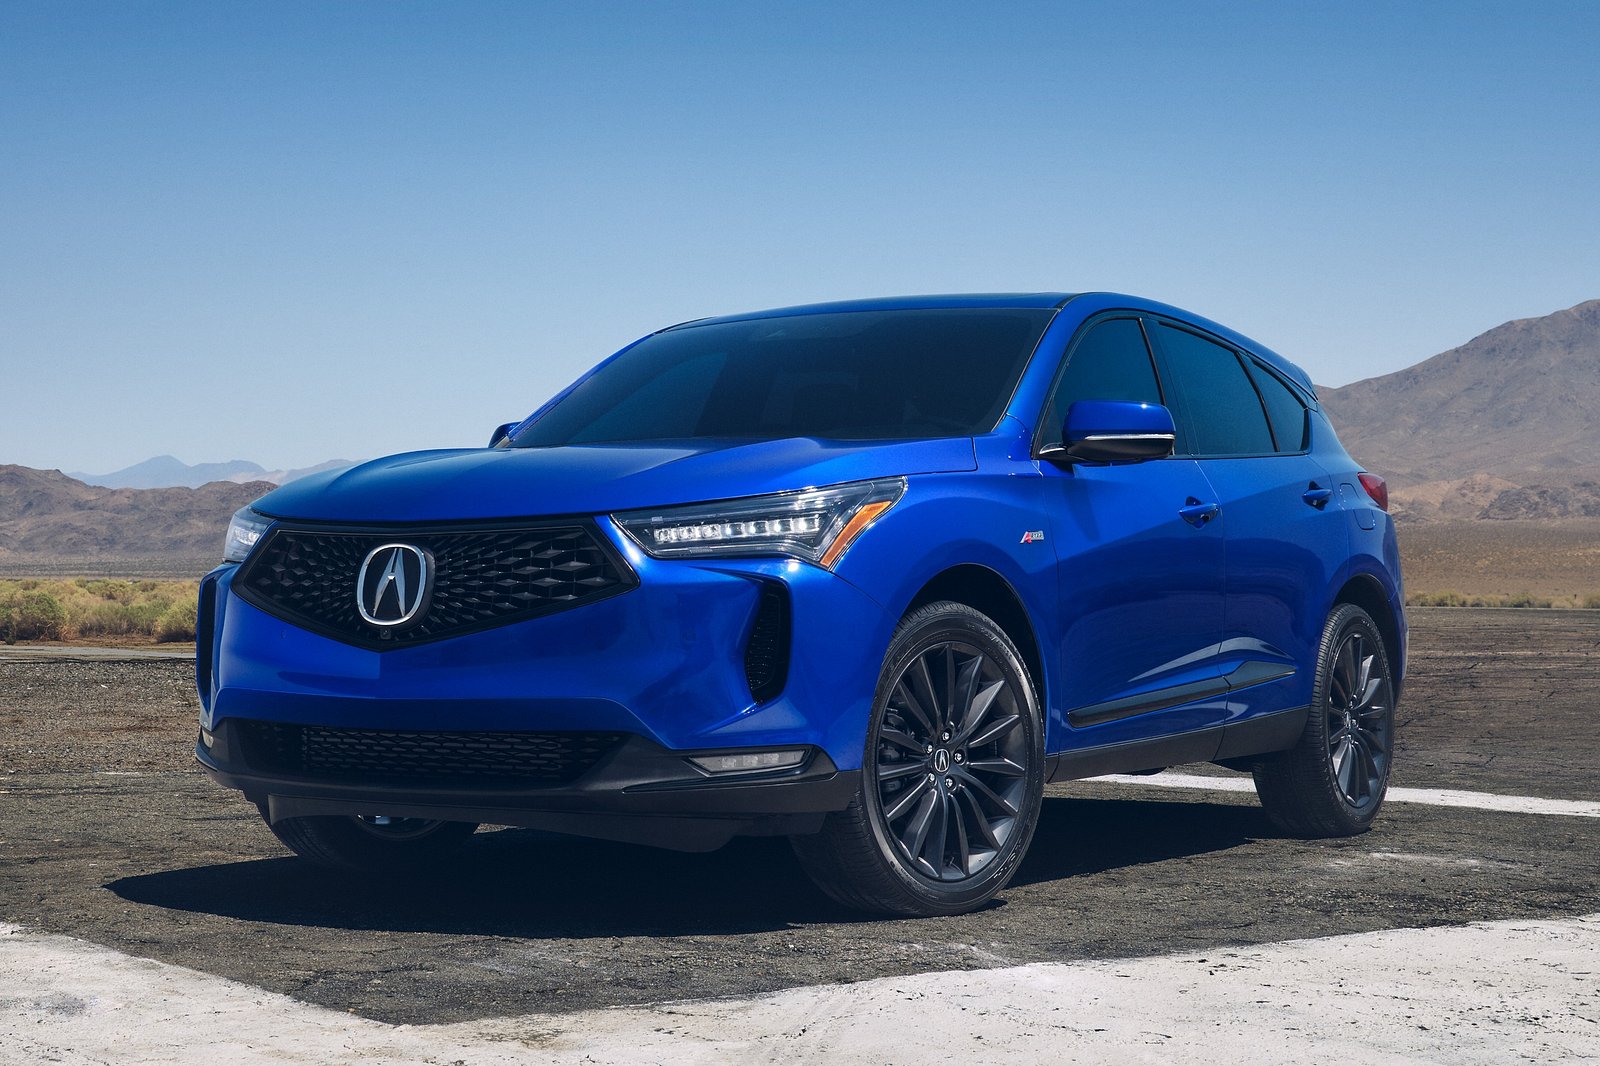 technology, rumor, acura's most popular models going electric before 2030